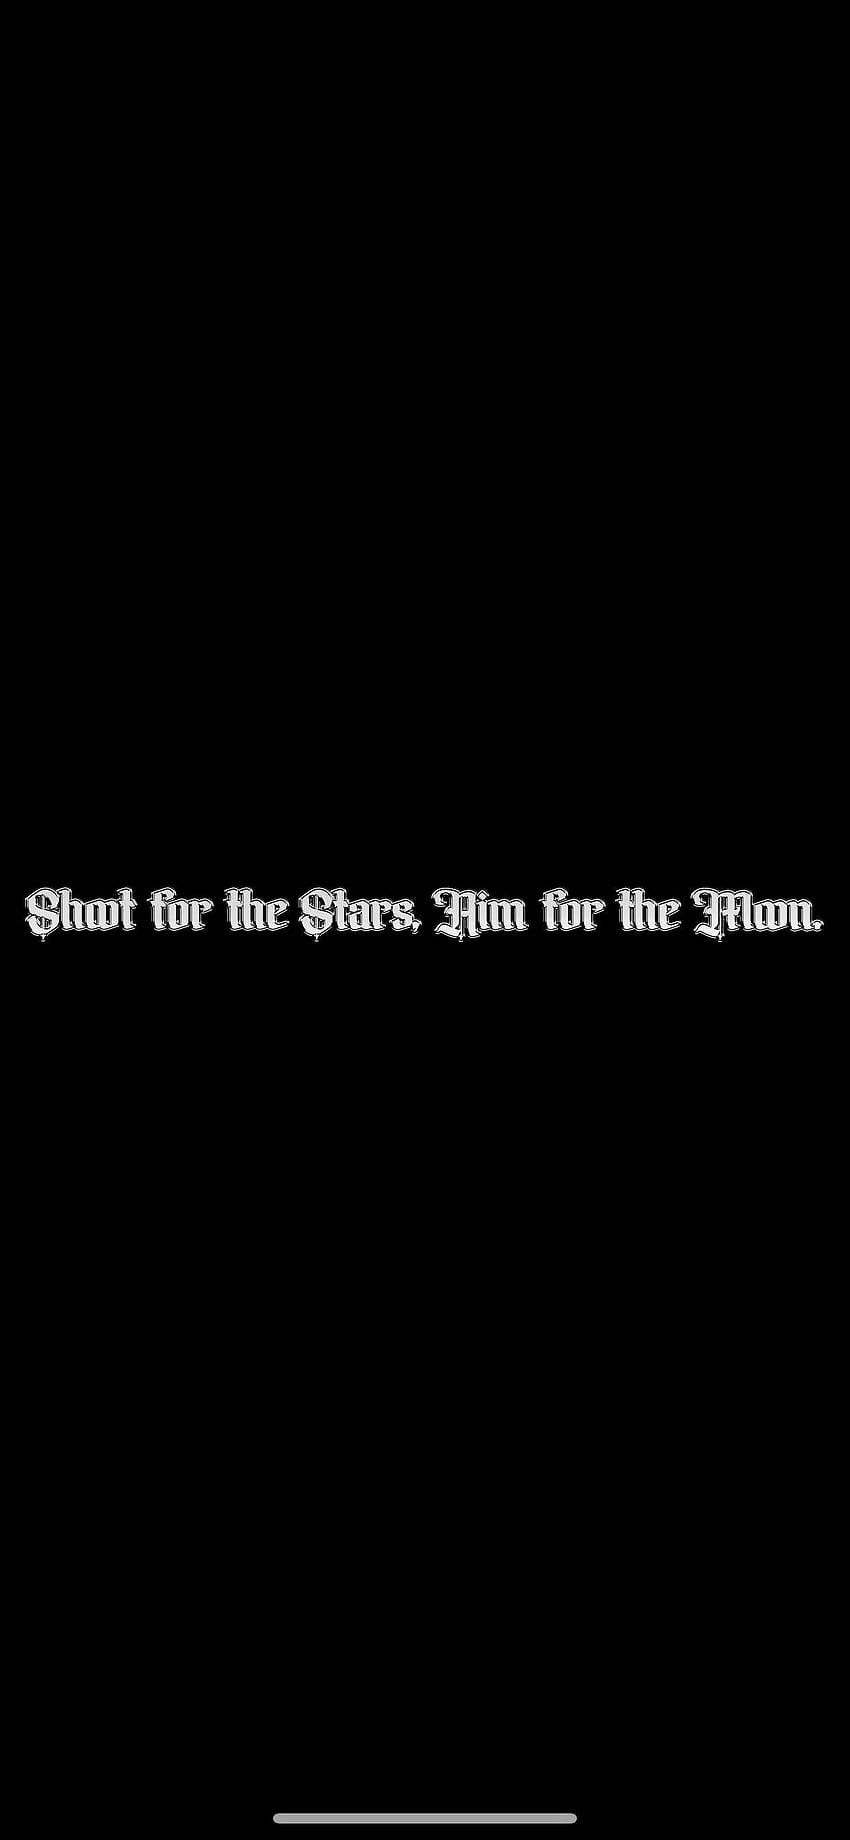 Shoot for the Stars, Aim for the Moon. : hiphop, shoot for the stars aim for the moon HD phone wallpaper